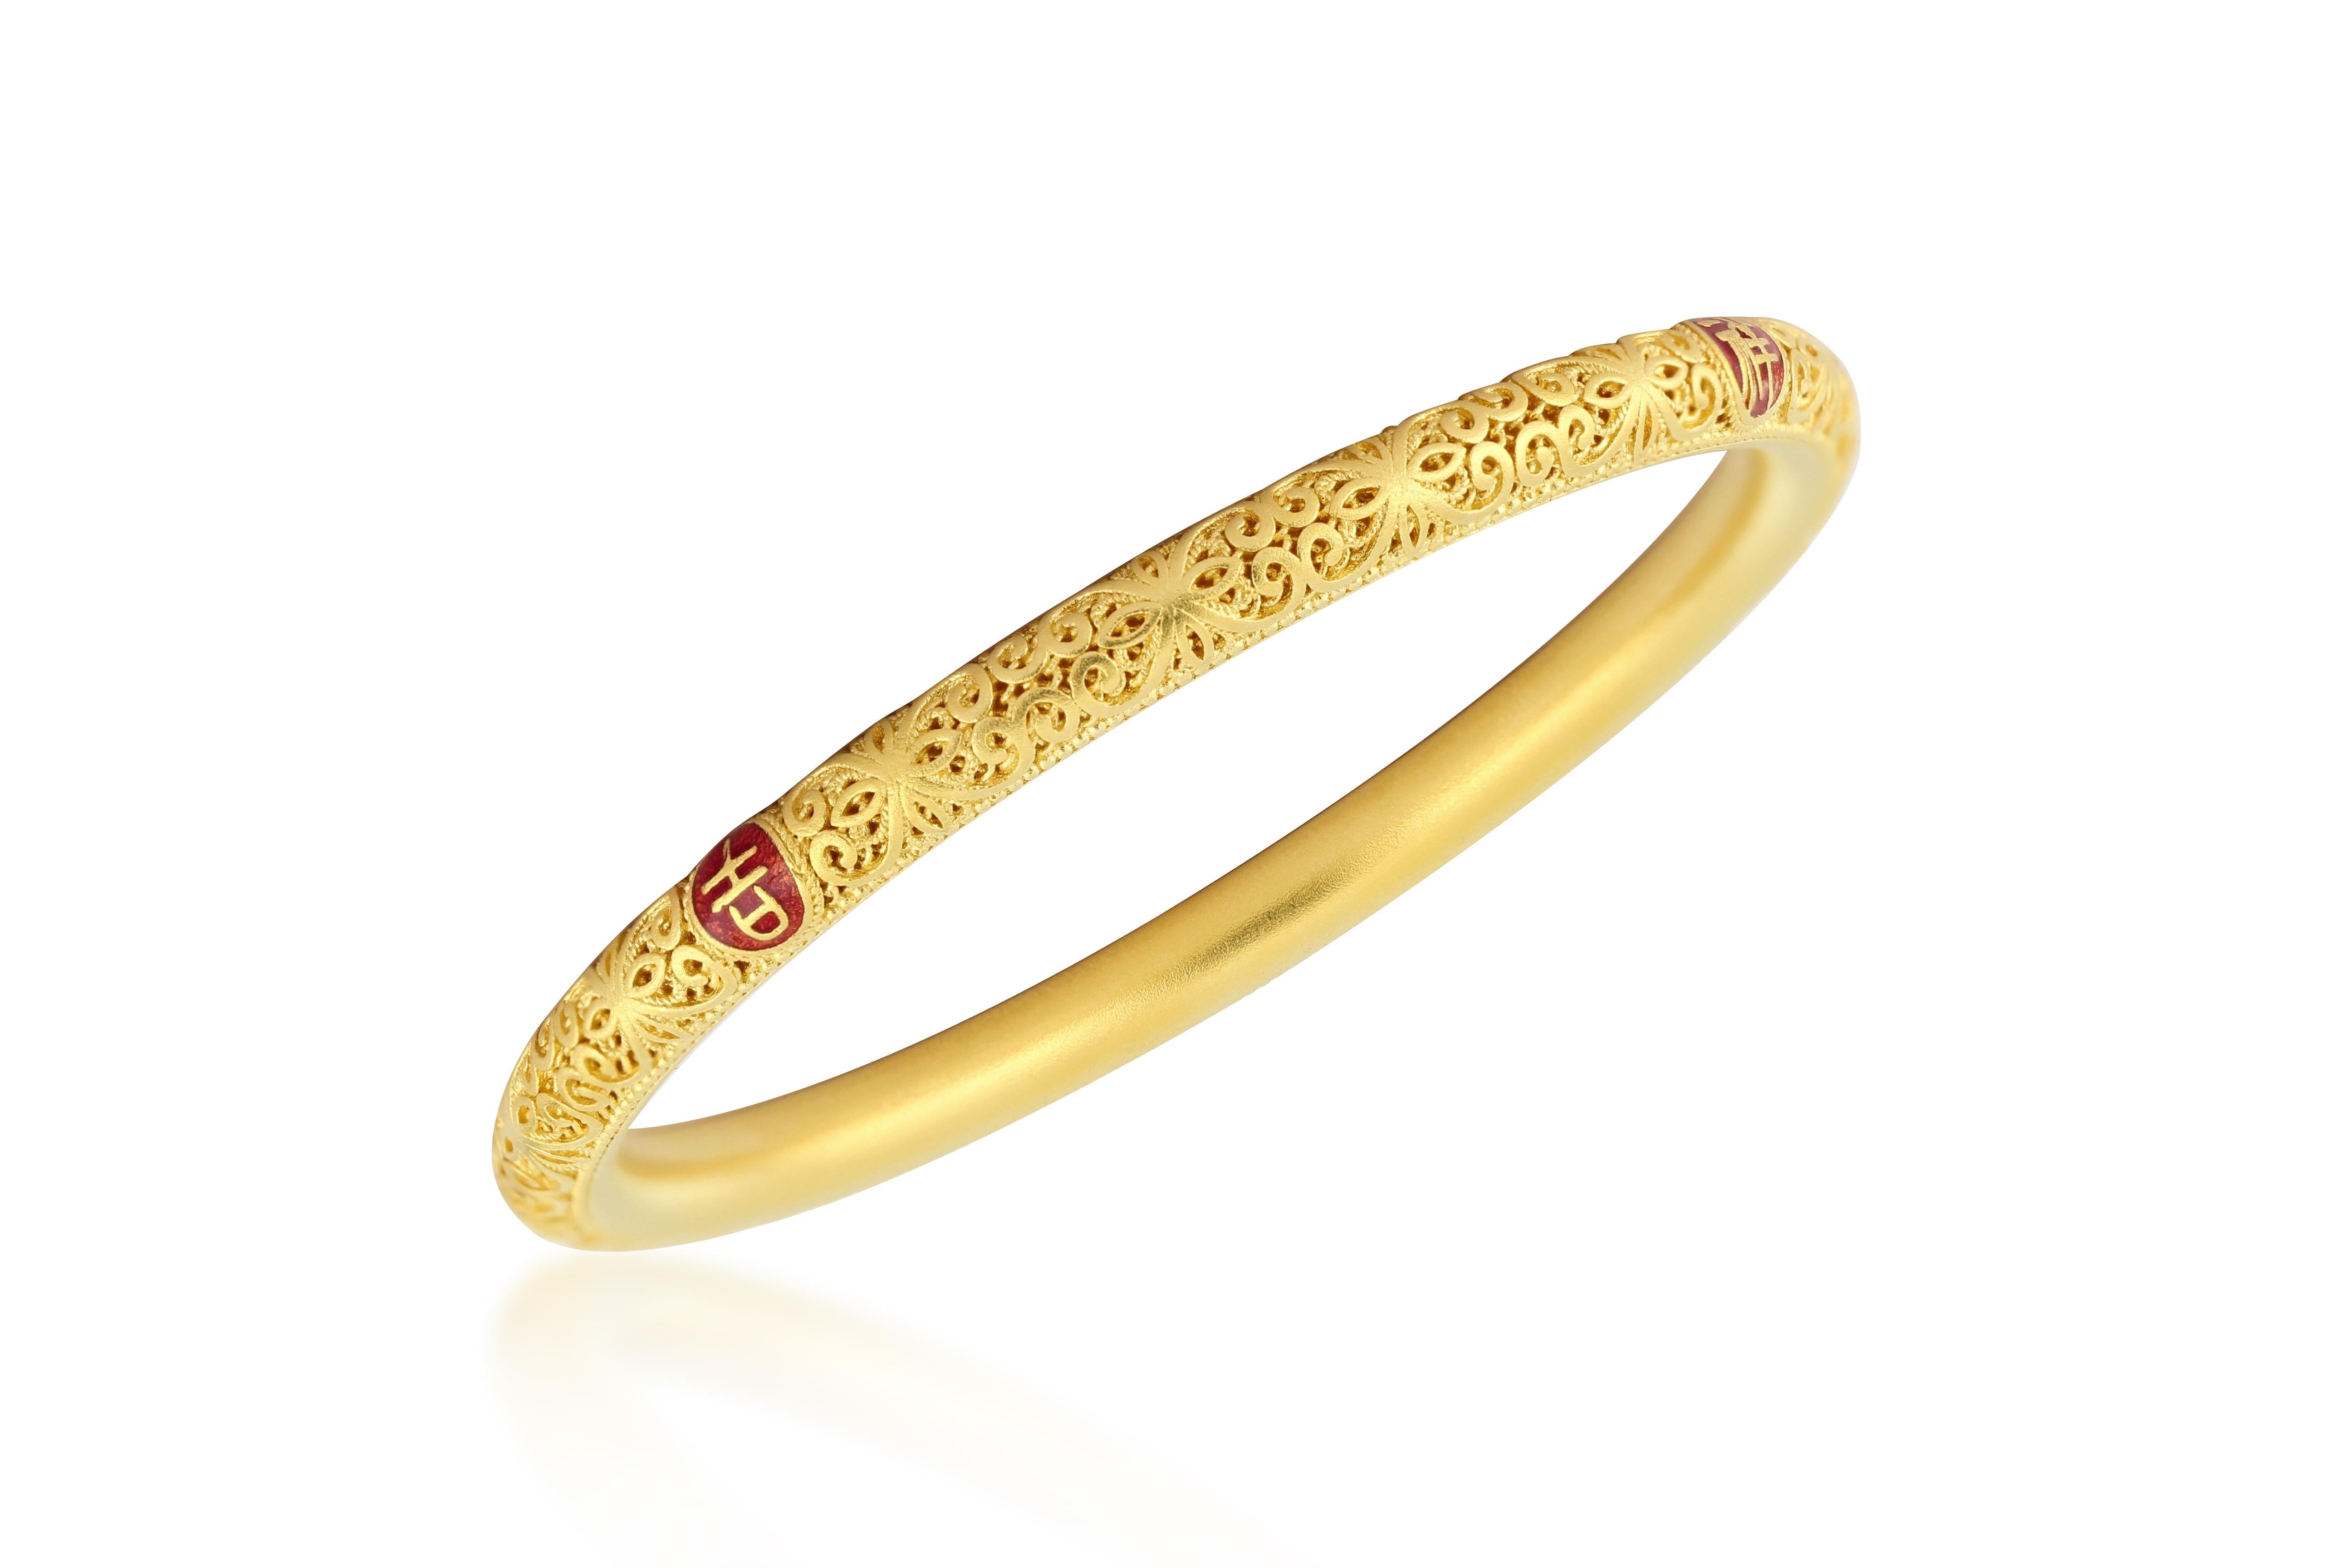 Contemporary 99.9% Pure gold bangle with Filigree Inlay Art For Sale